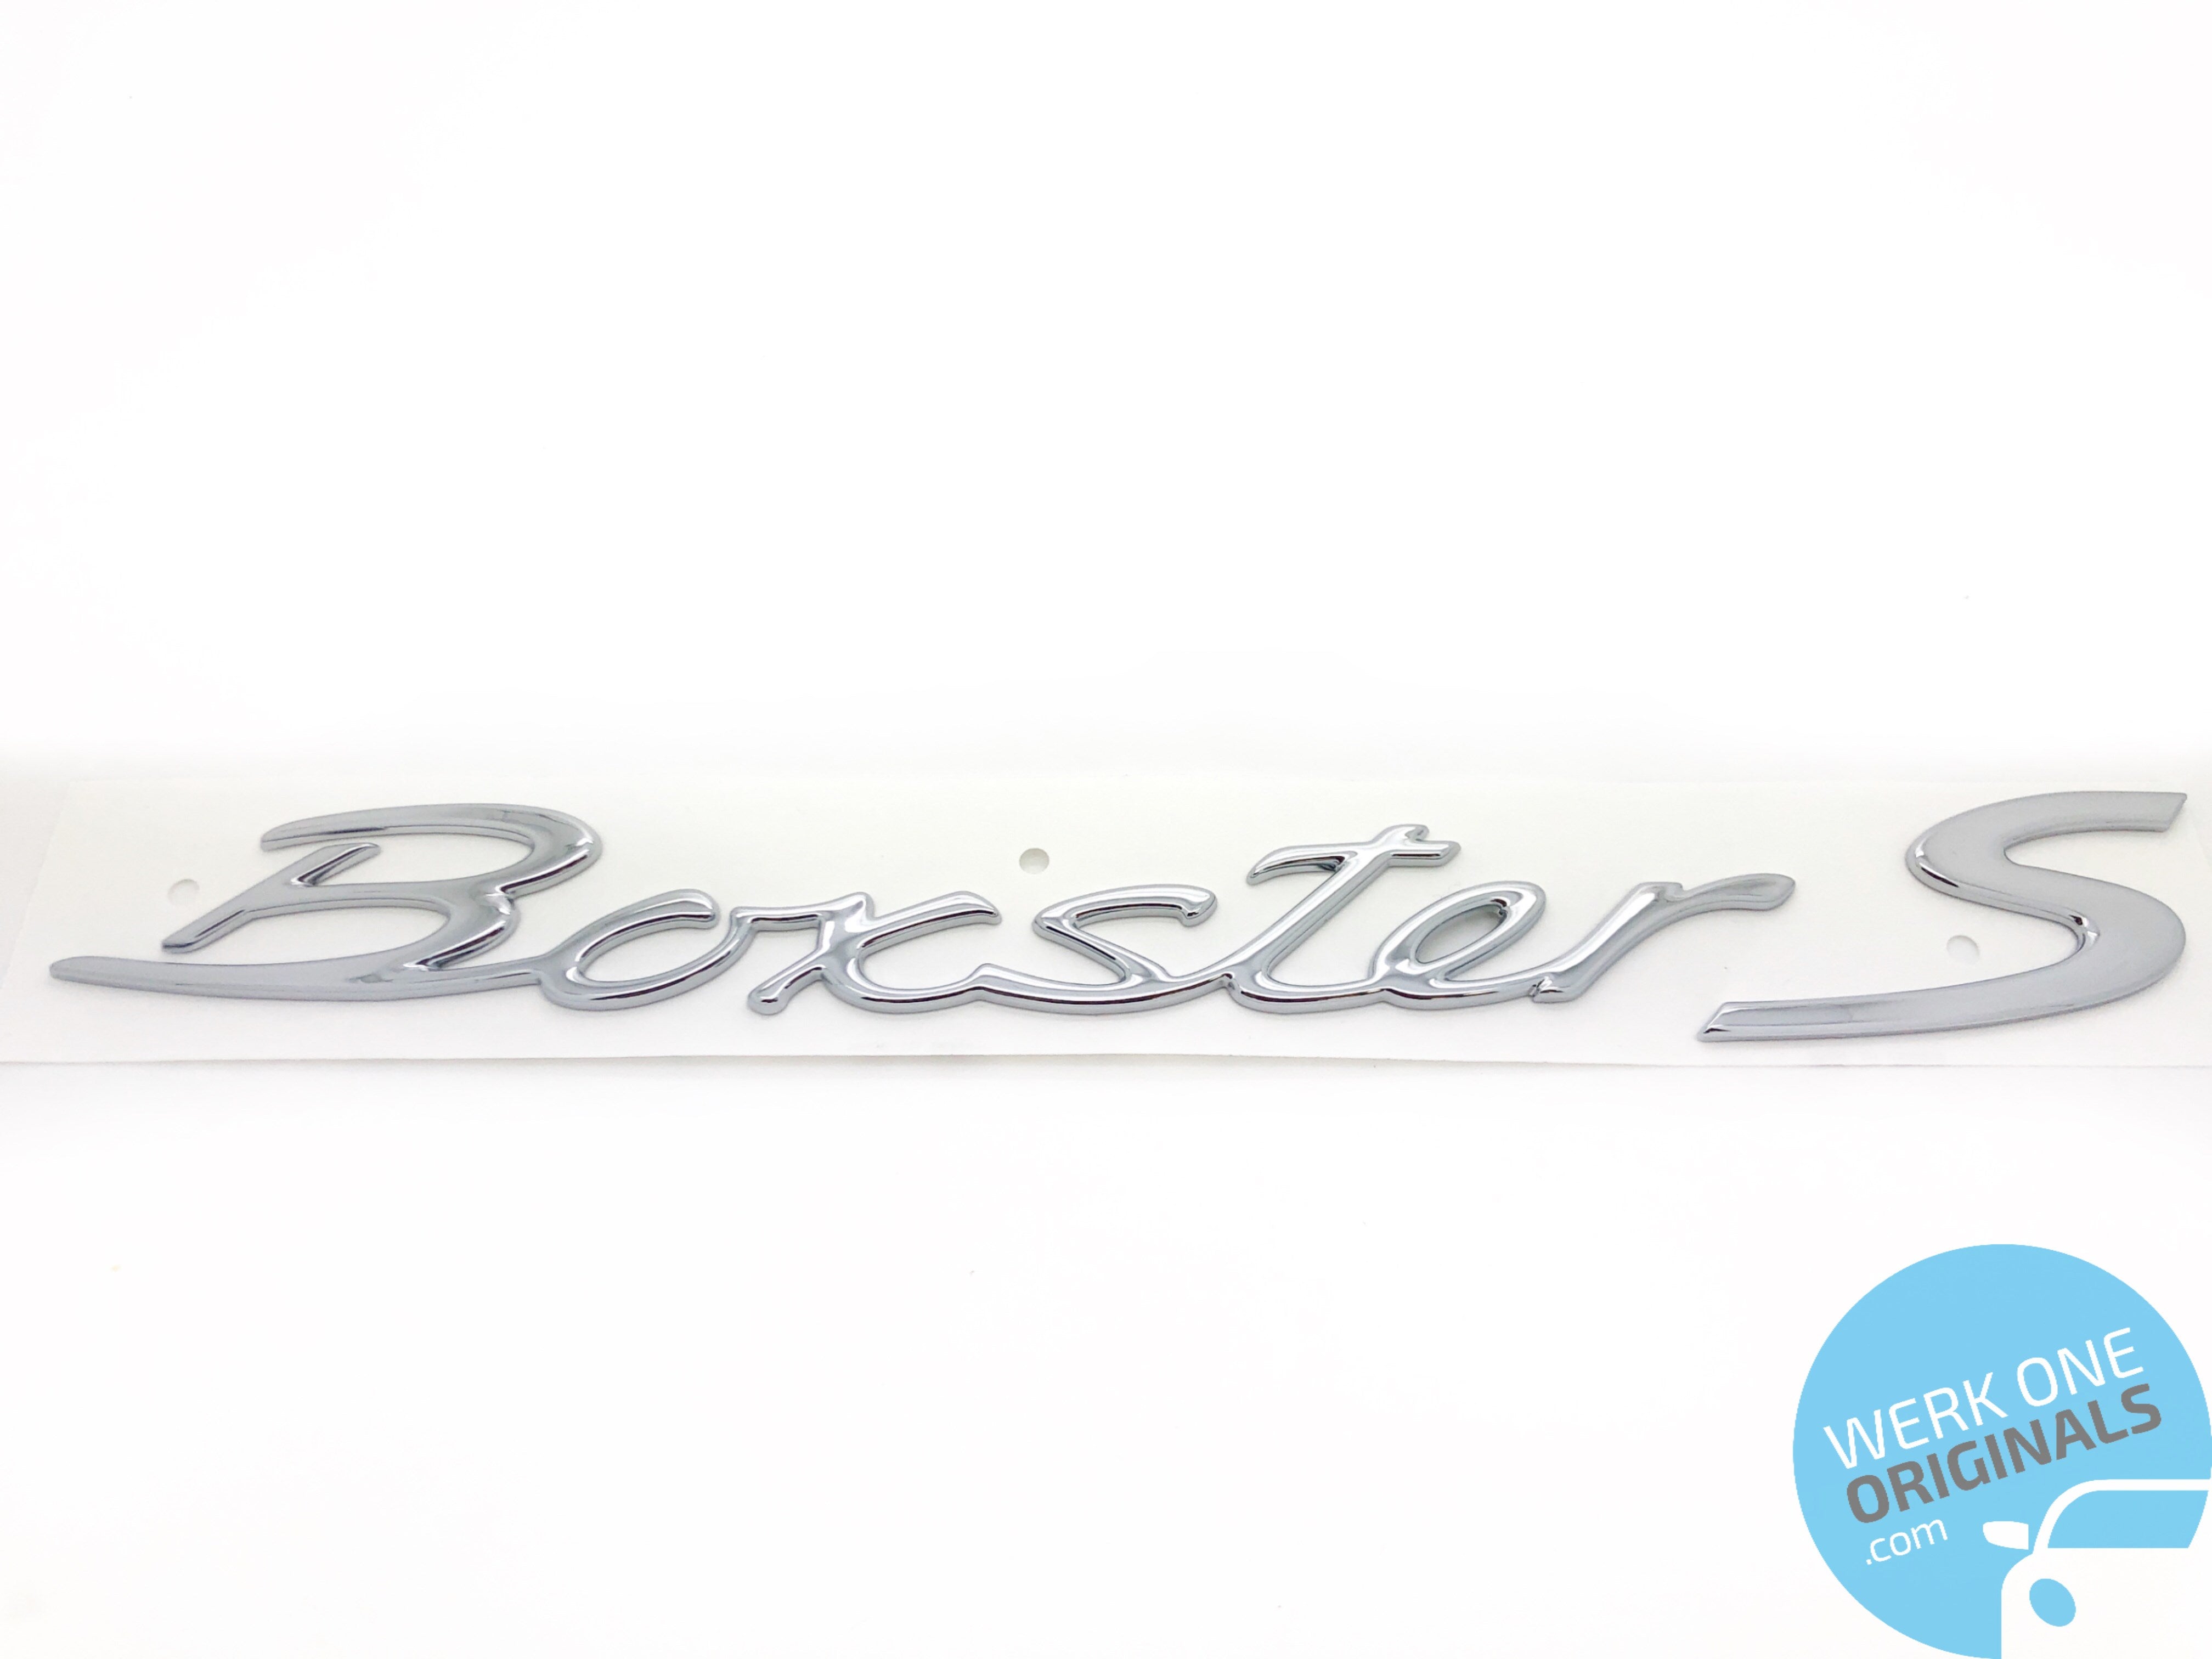 Porsche 'Boxster S' Rear Badge in Chrome Silver for Boxster S Type 986 Models